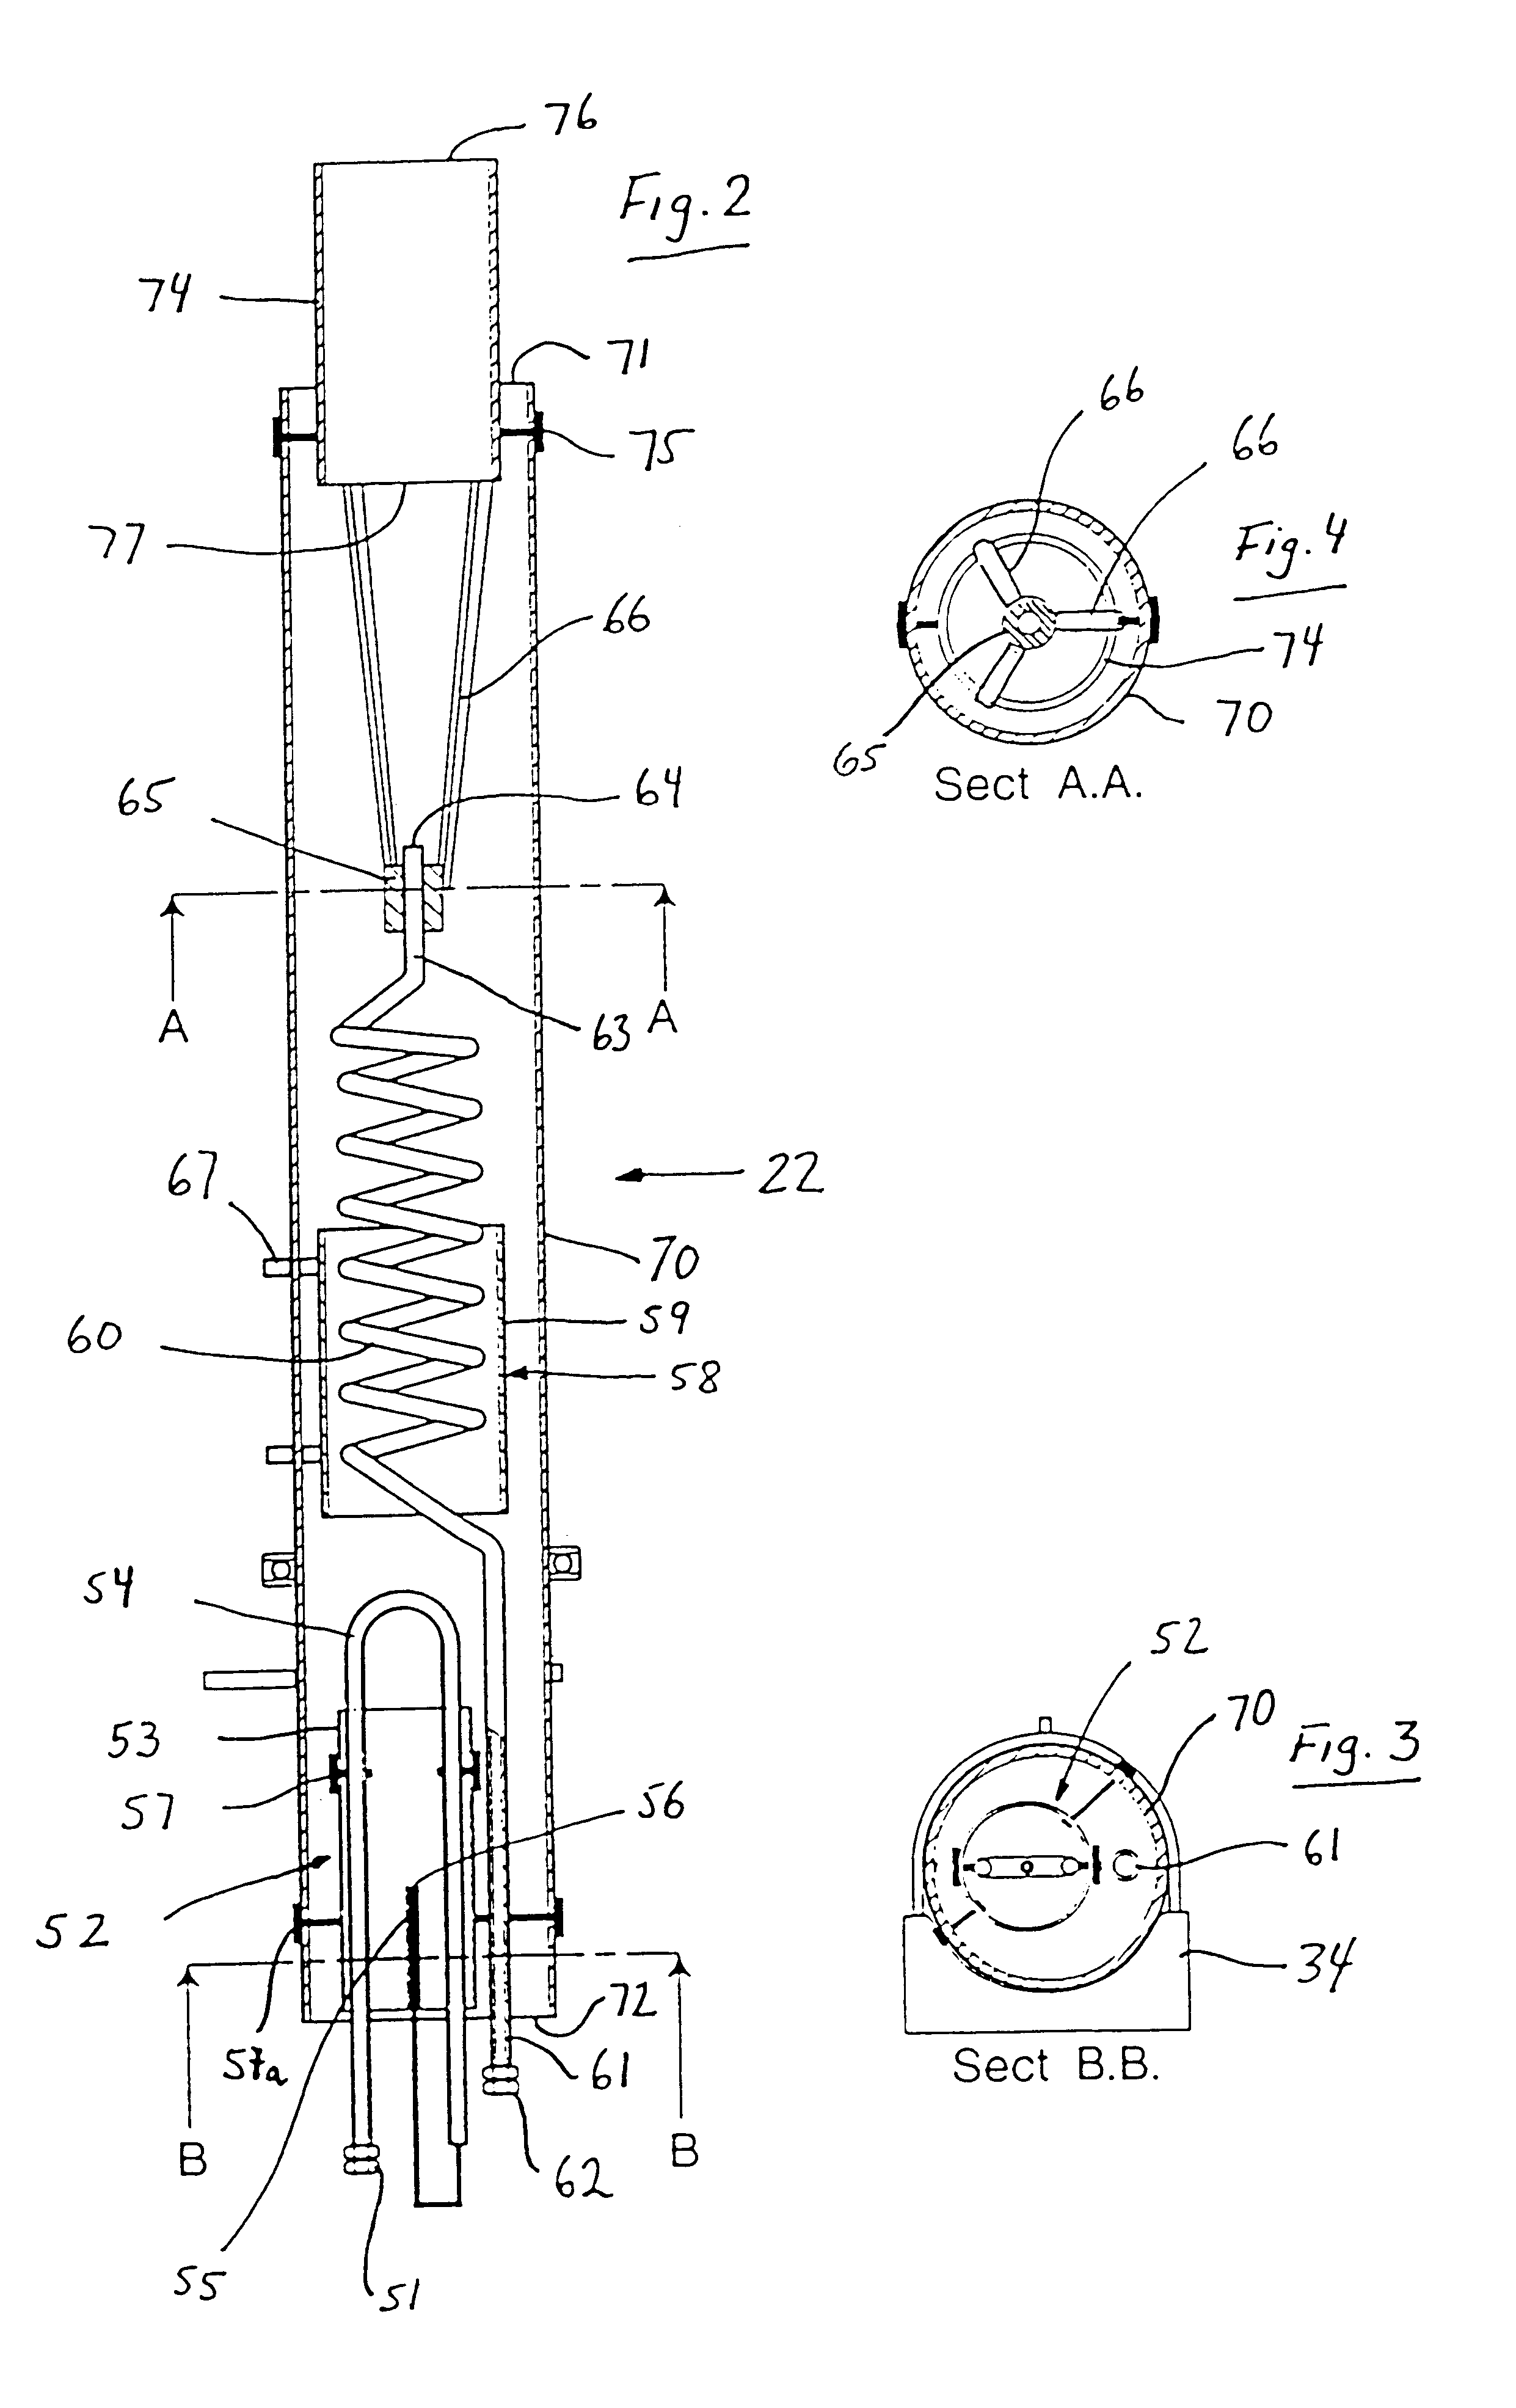 Weed and plant pests control apparatus and method